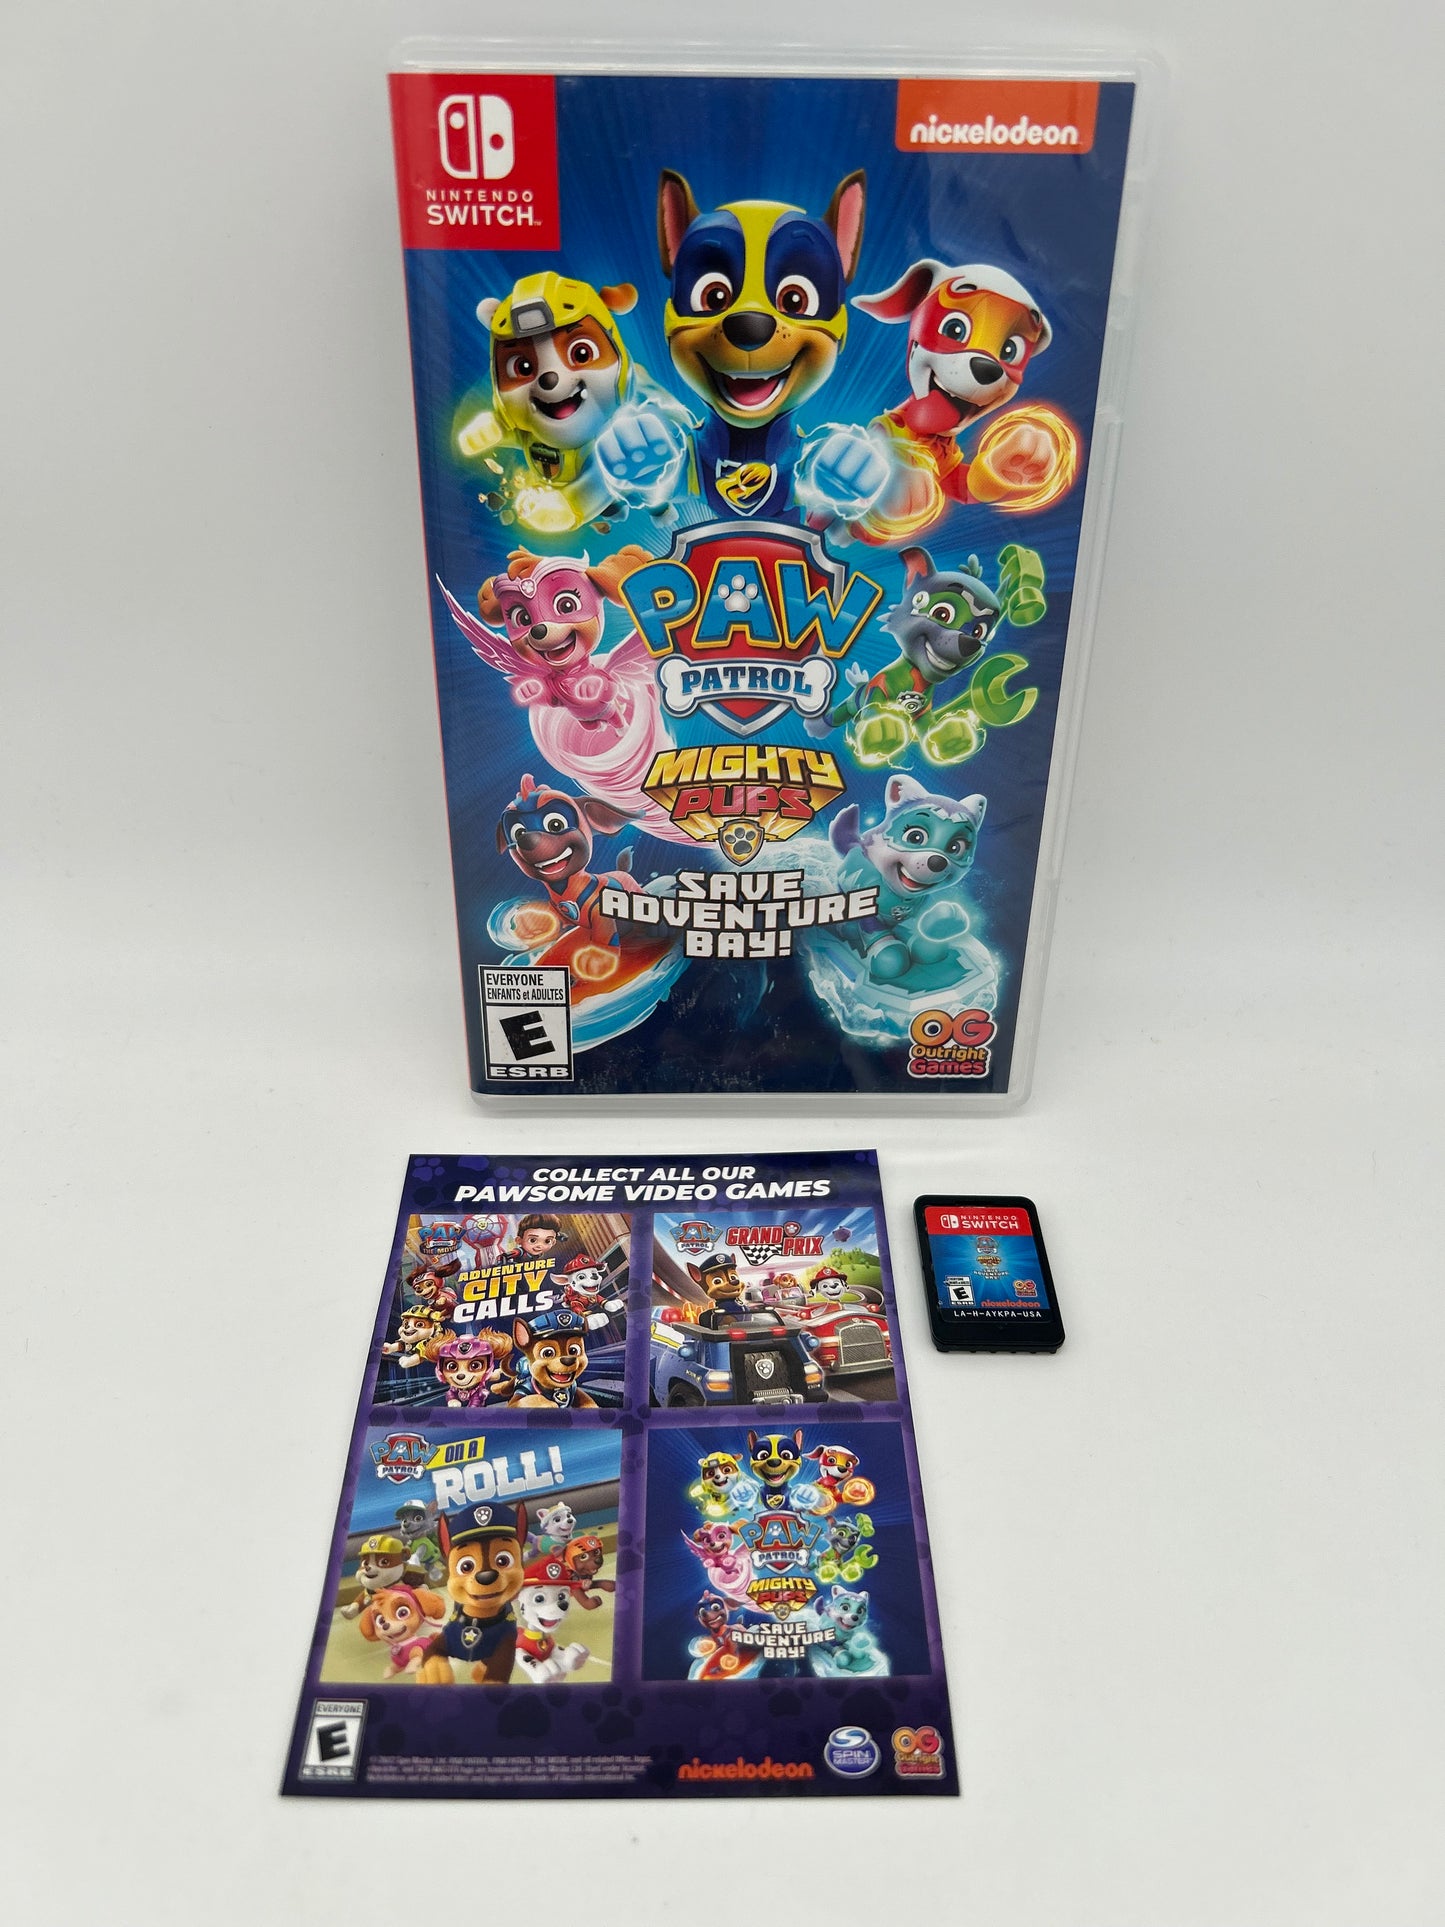 PiXEL-RETRO.COM : NINTENDO SWITCH COMPLETE IN BOX COMPLETE MANUAL GAME NTSC PAW PATROL MIGHTY PUPS SAVE ADVENTURE BAY